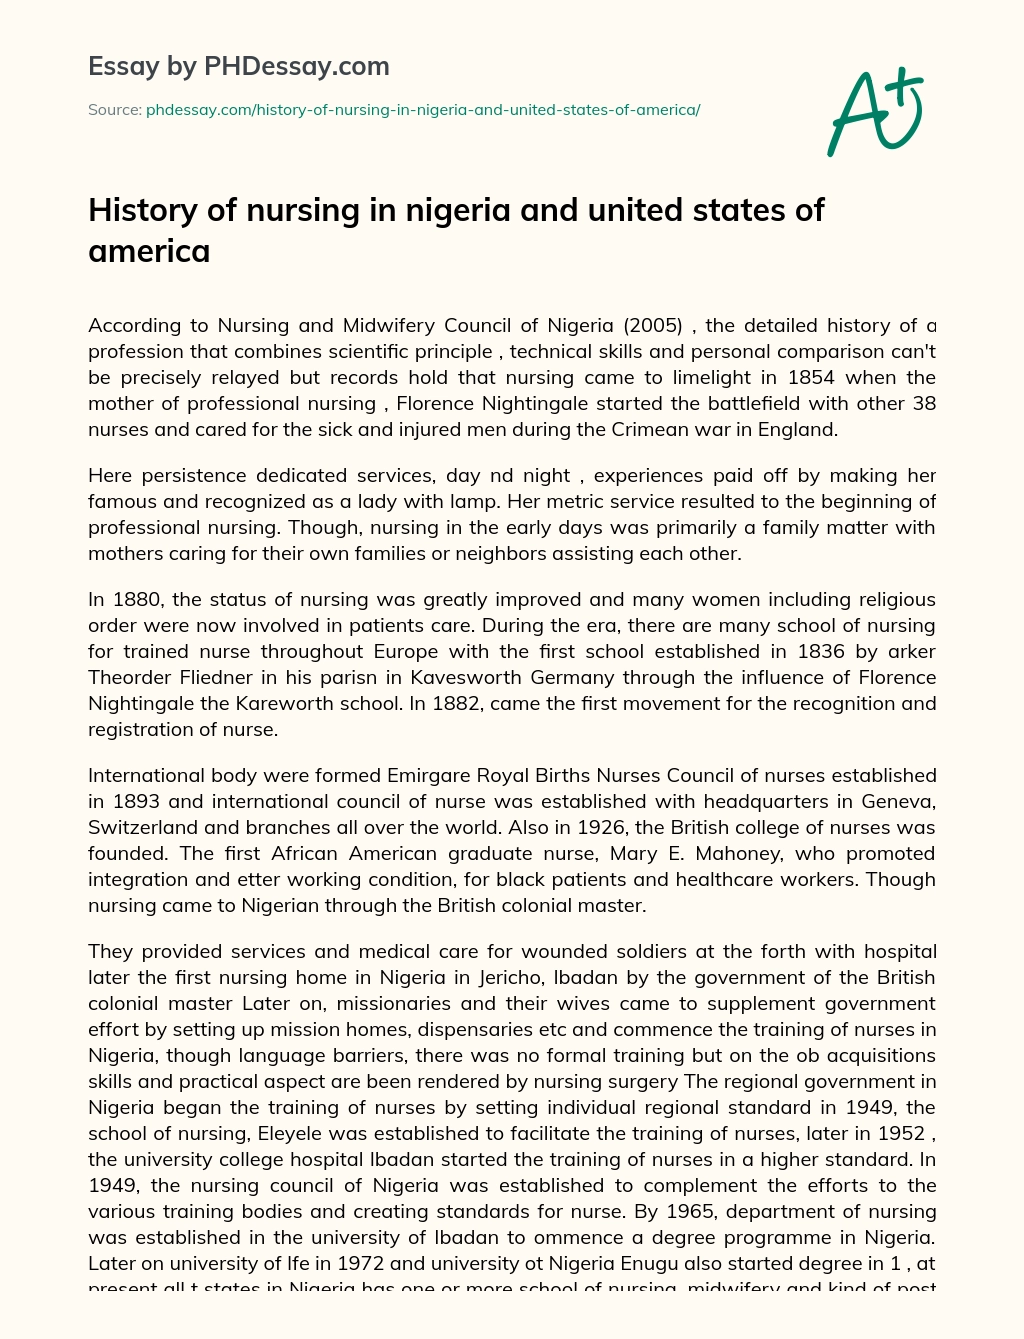 History of nursing in nigeria and united states of america essay